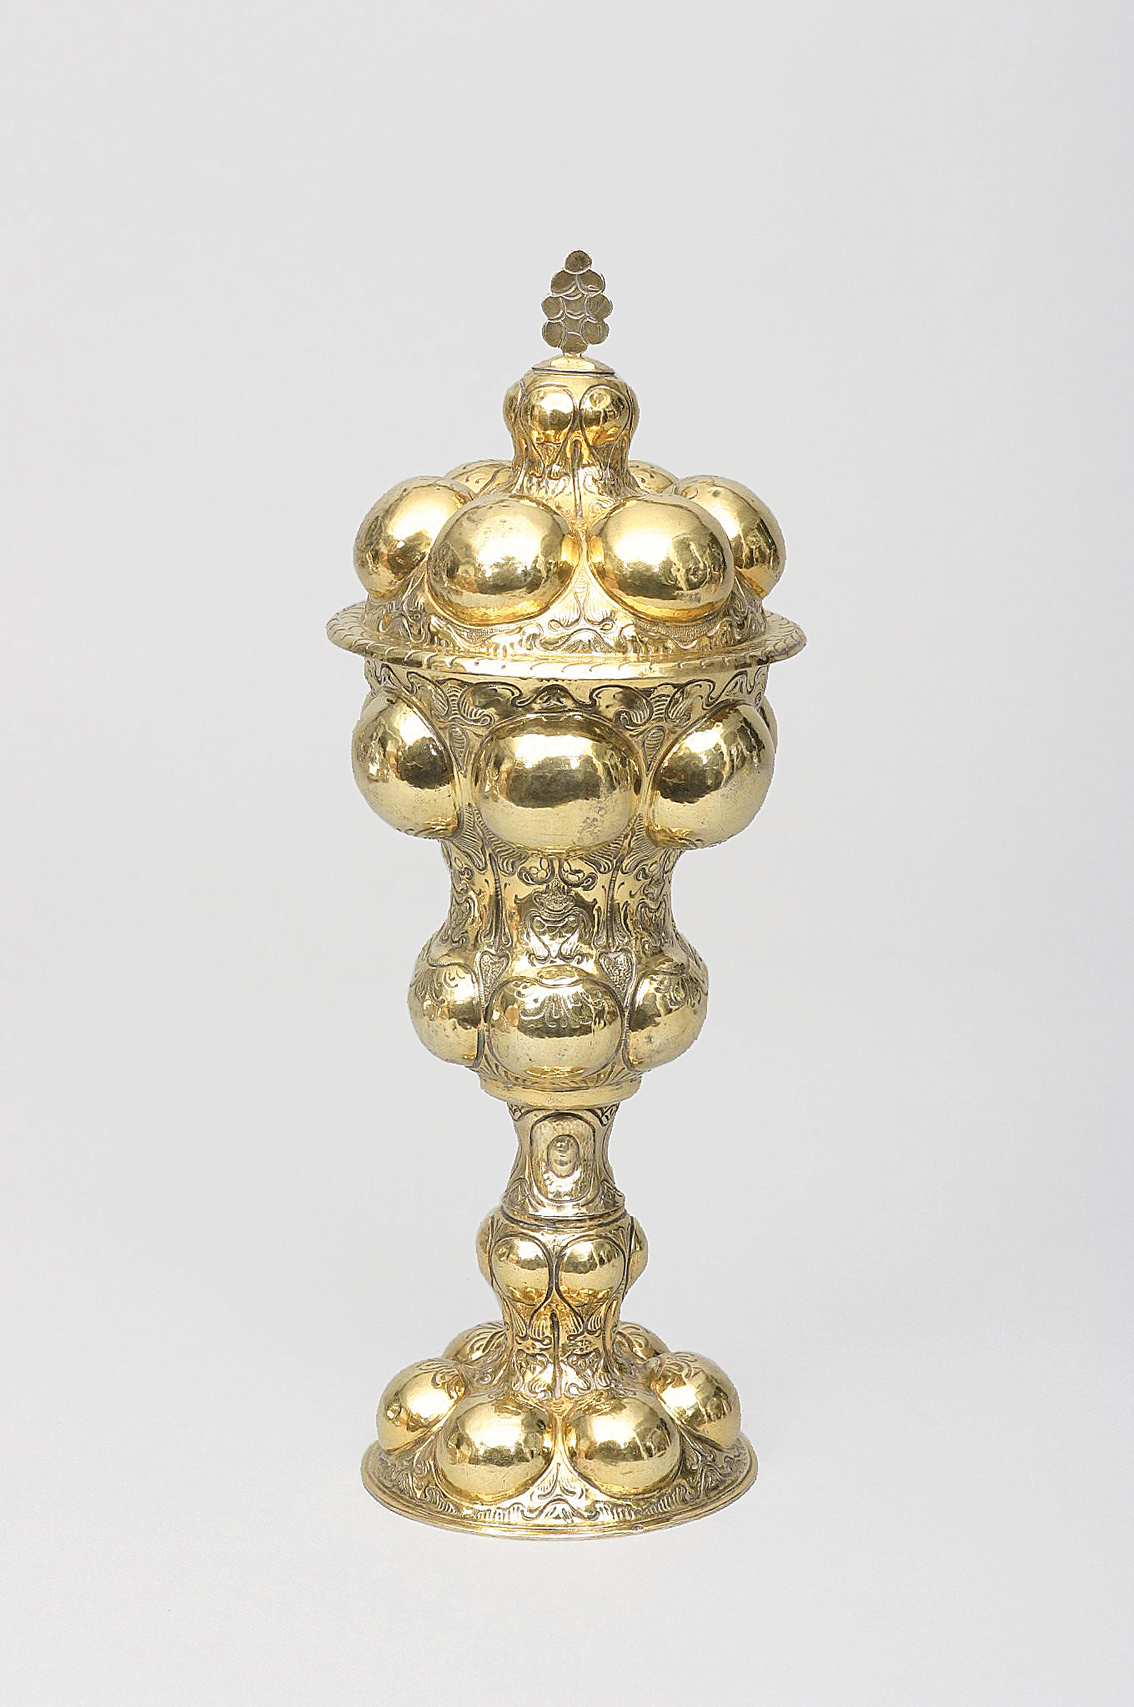 A splendid Baroque goblet with cover